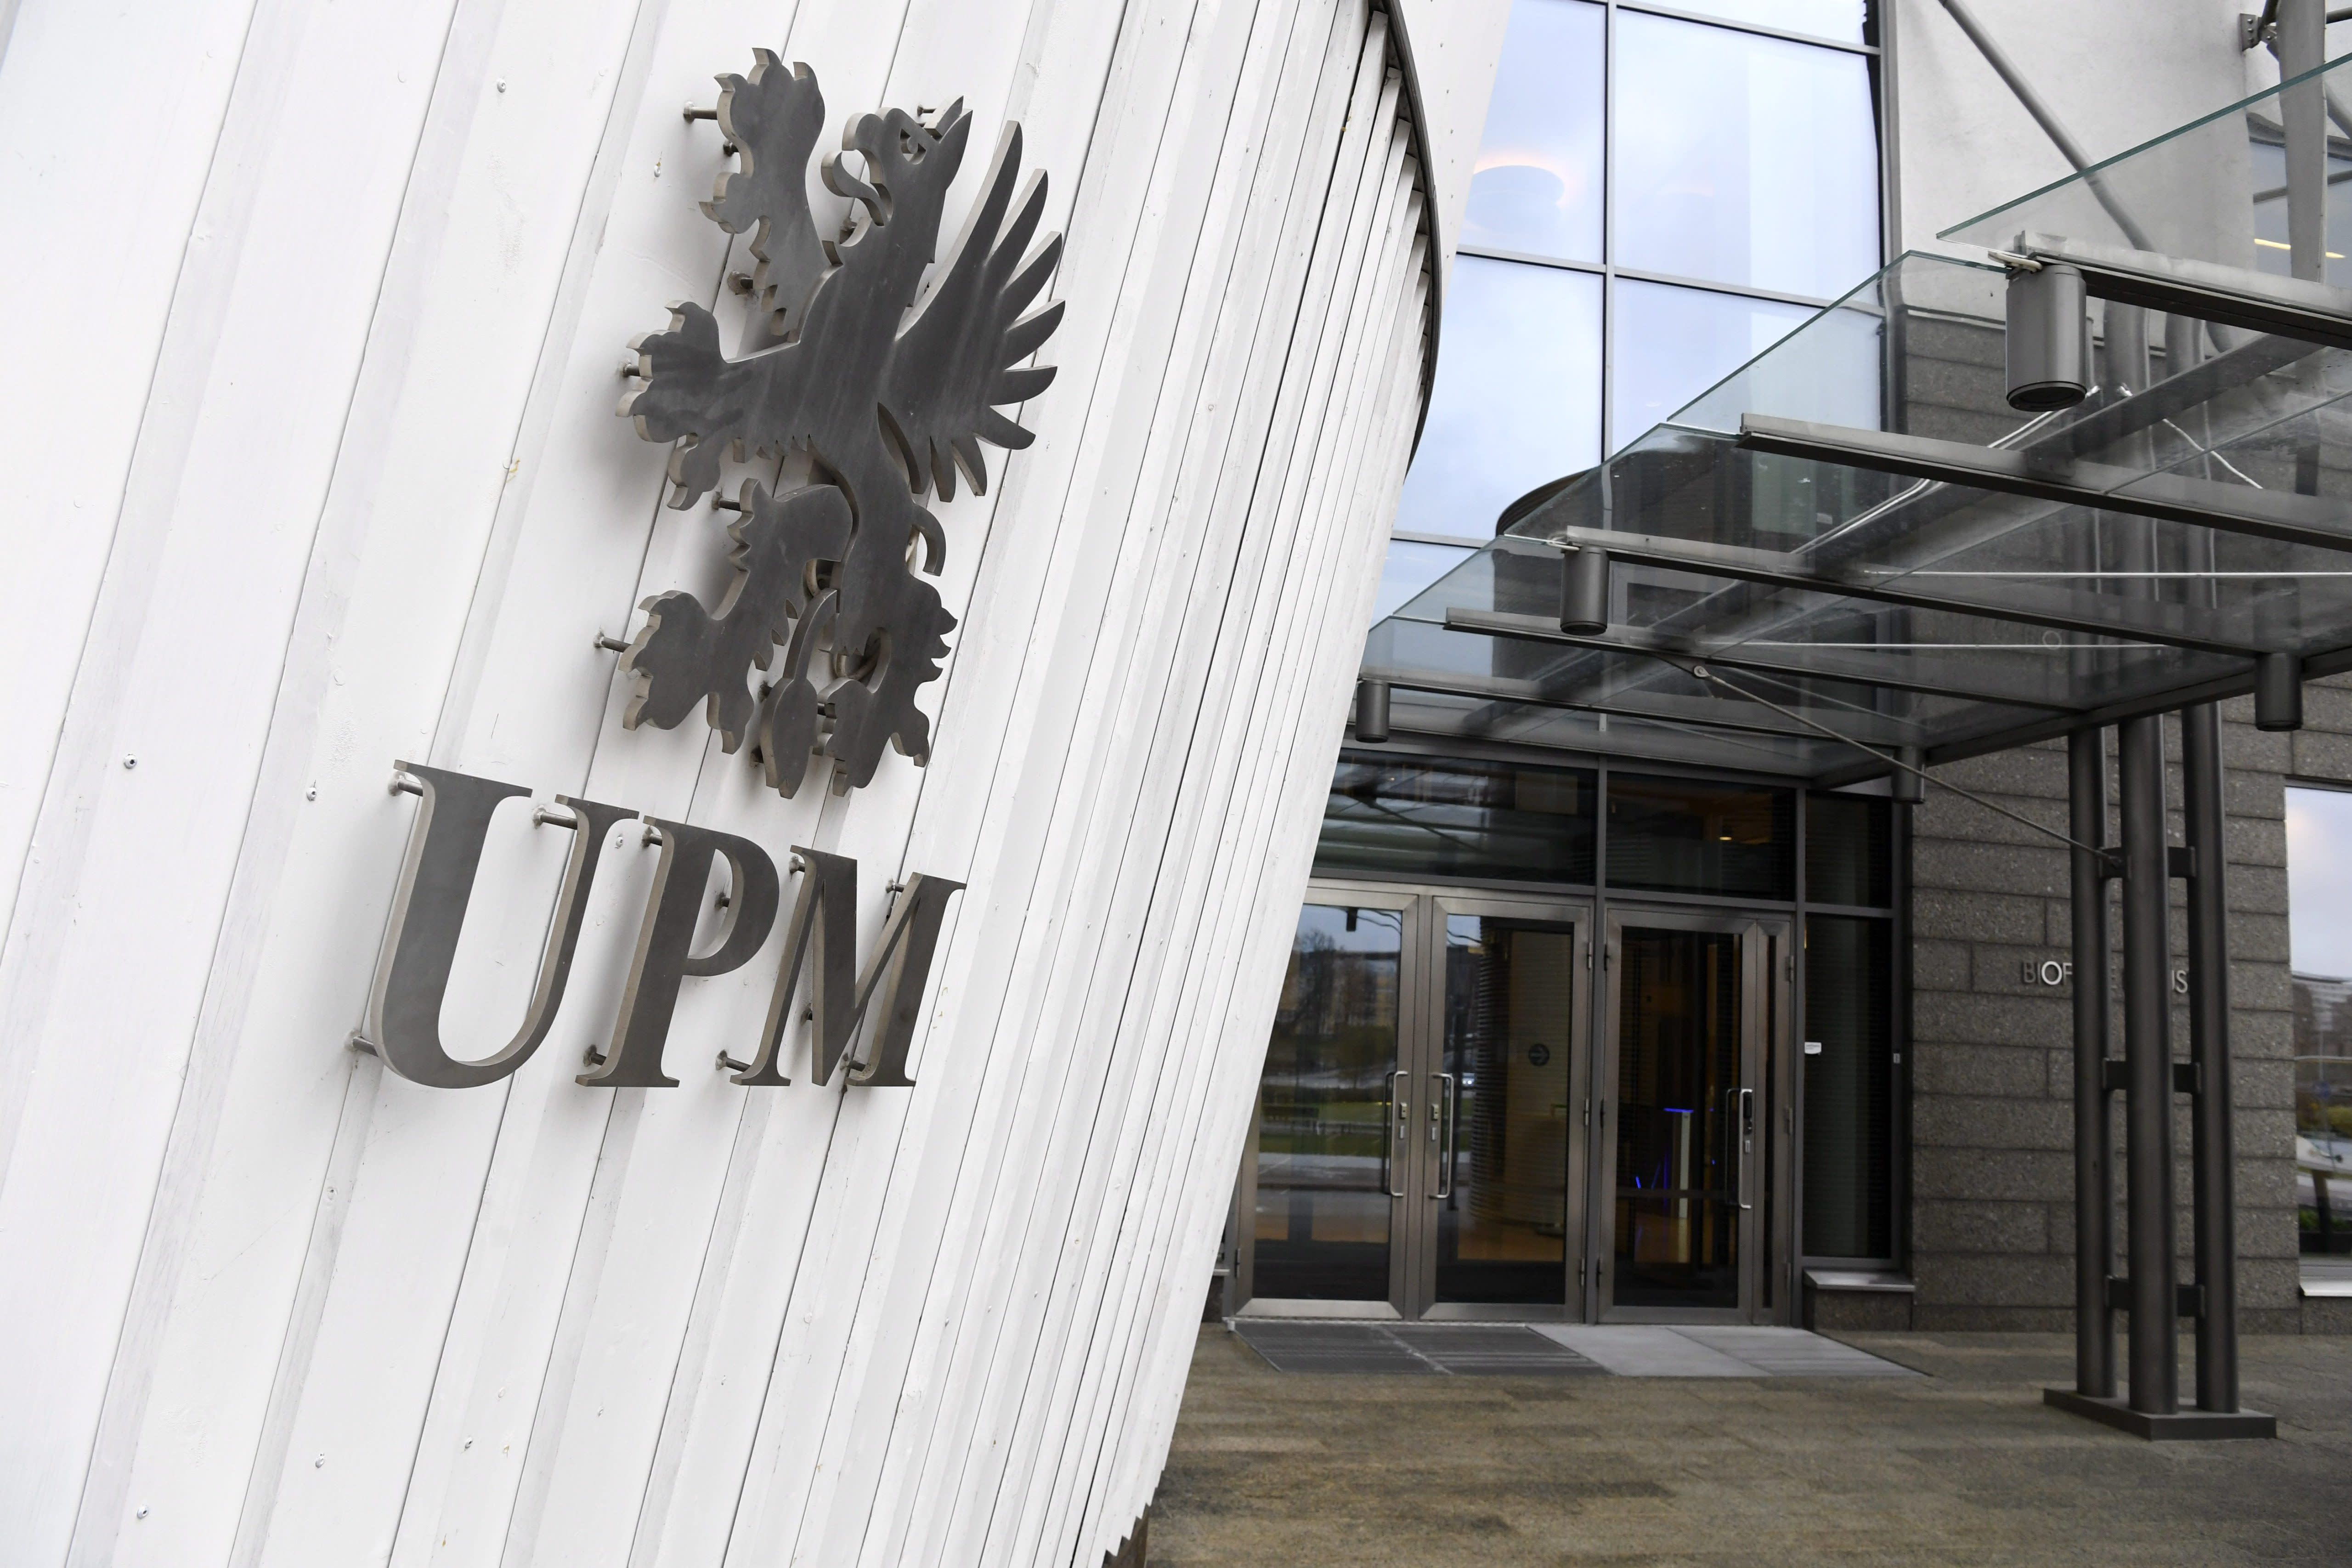 According to the law, employees must return to UPM’s mills